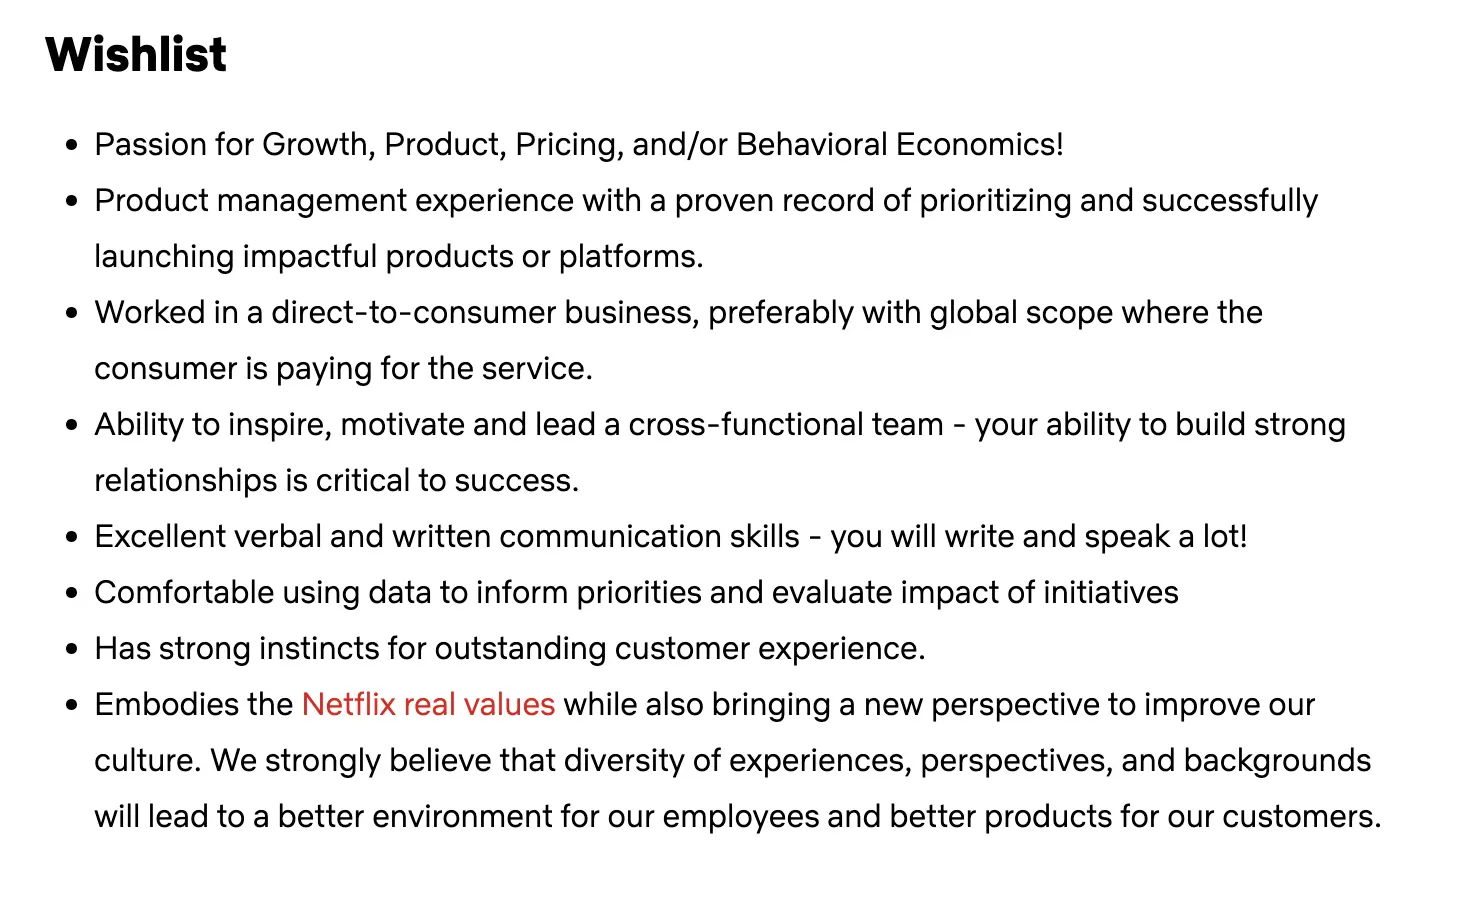 Screenshot of the "wishlist" section of a Netflix product manager job ad.